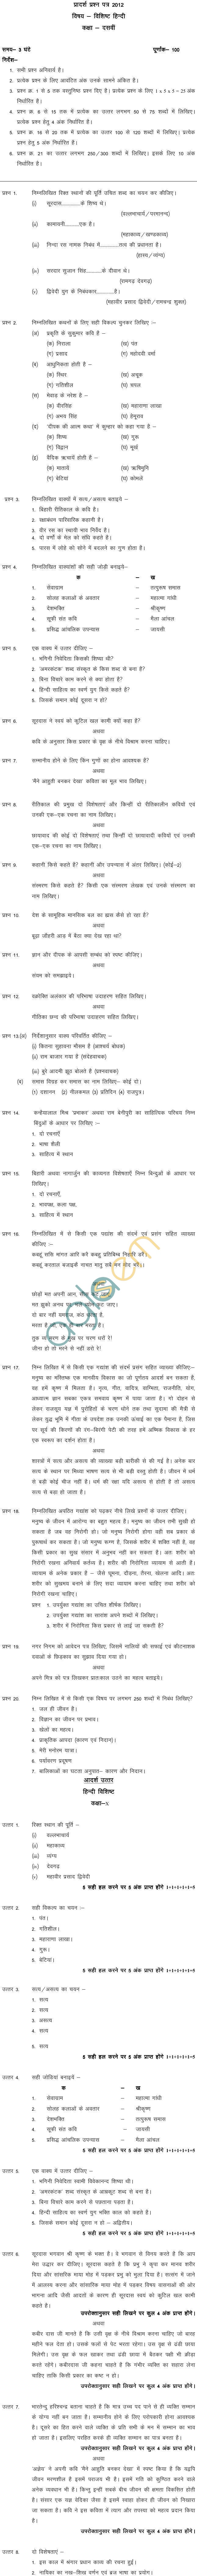 MP Board Class X Hindi Special Model Questions & Answers - Set 1/